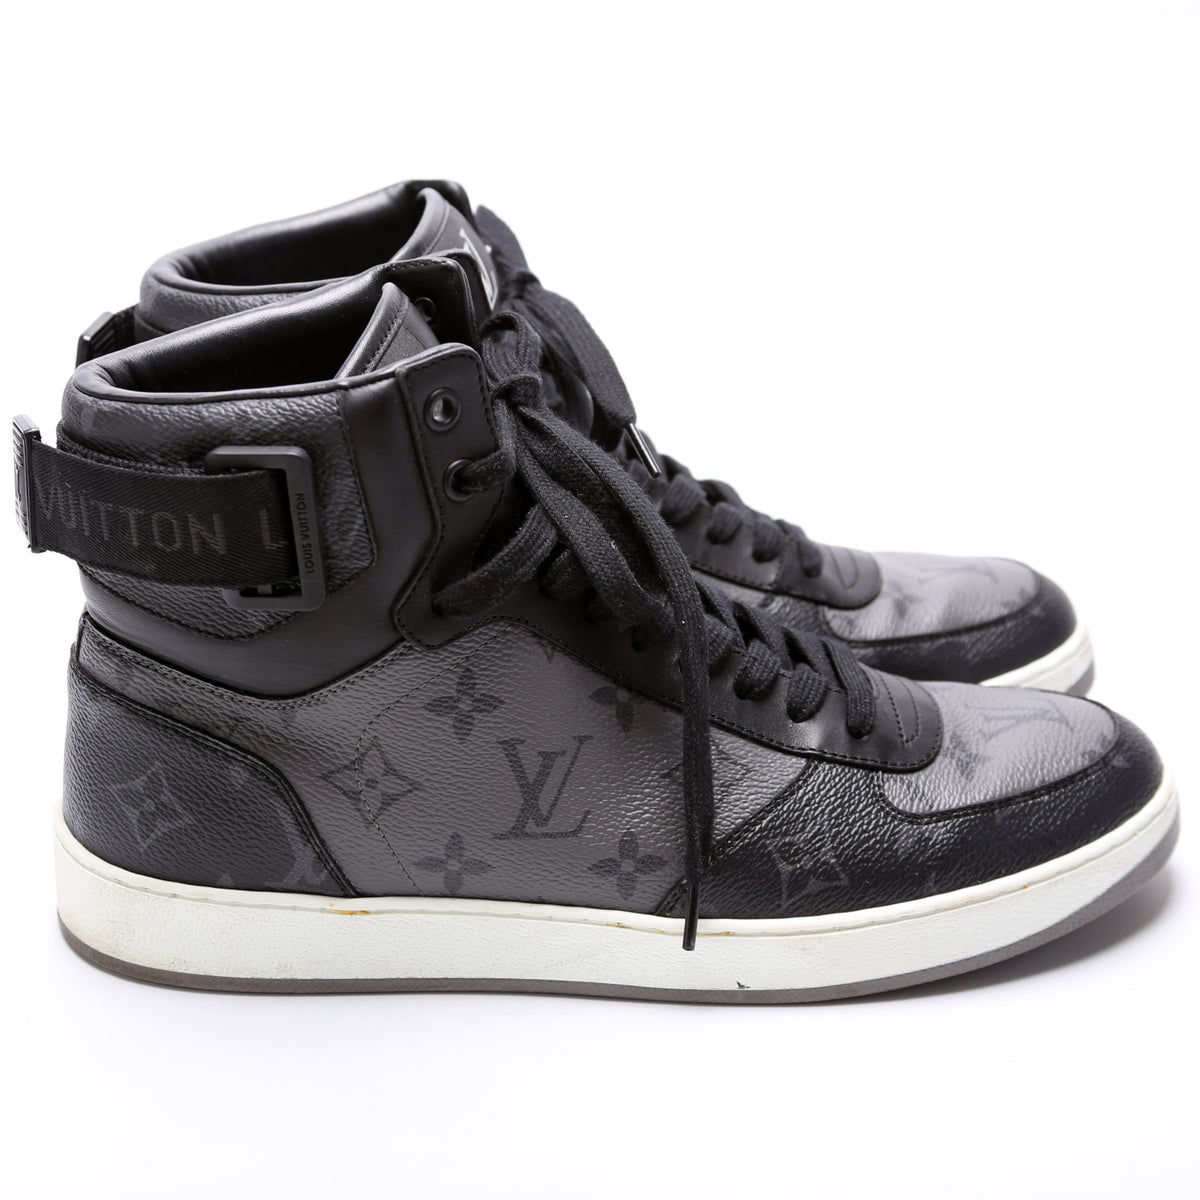 Louis Vuitton Rivoli Black and Red Sneakers